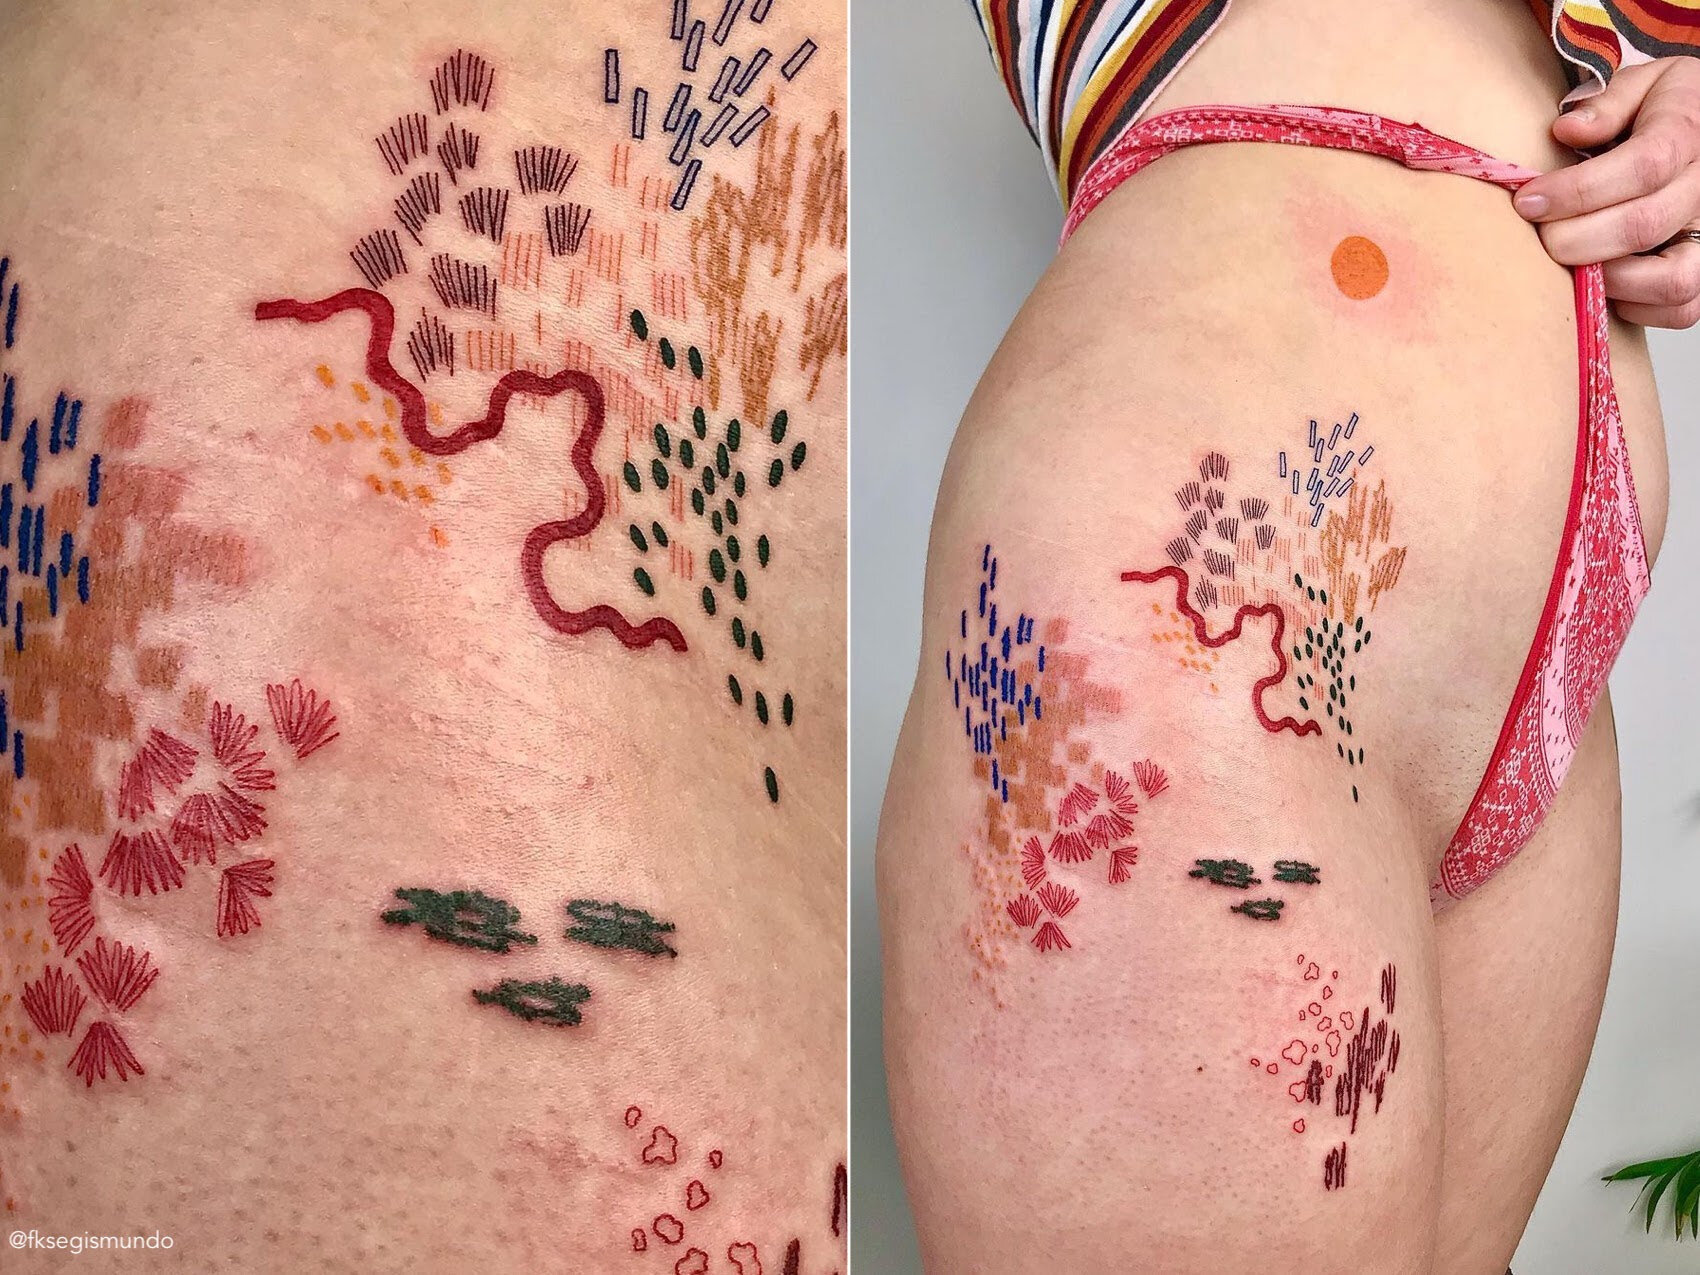 People are getting colorful tattoos that look like embroidery on skin